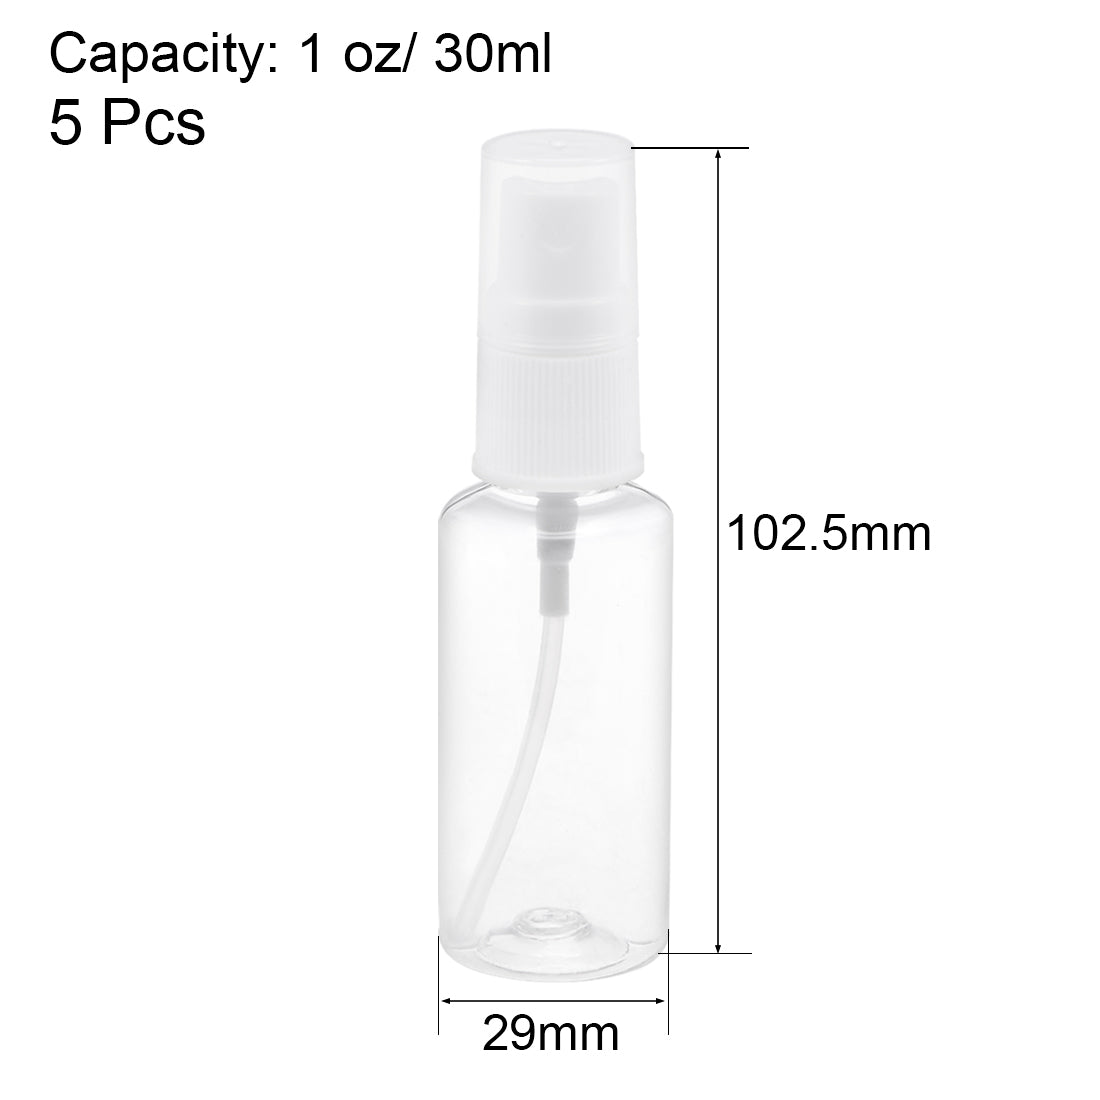 uxcell Uxcell Fine Mist Spray Bottle, 1 oz/ 30ml Plastic Spray Clear Bottles w Atomizer Pump and Refillable 3pcs